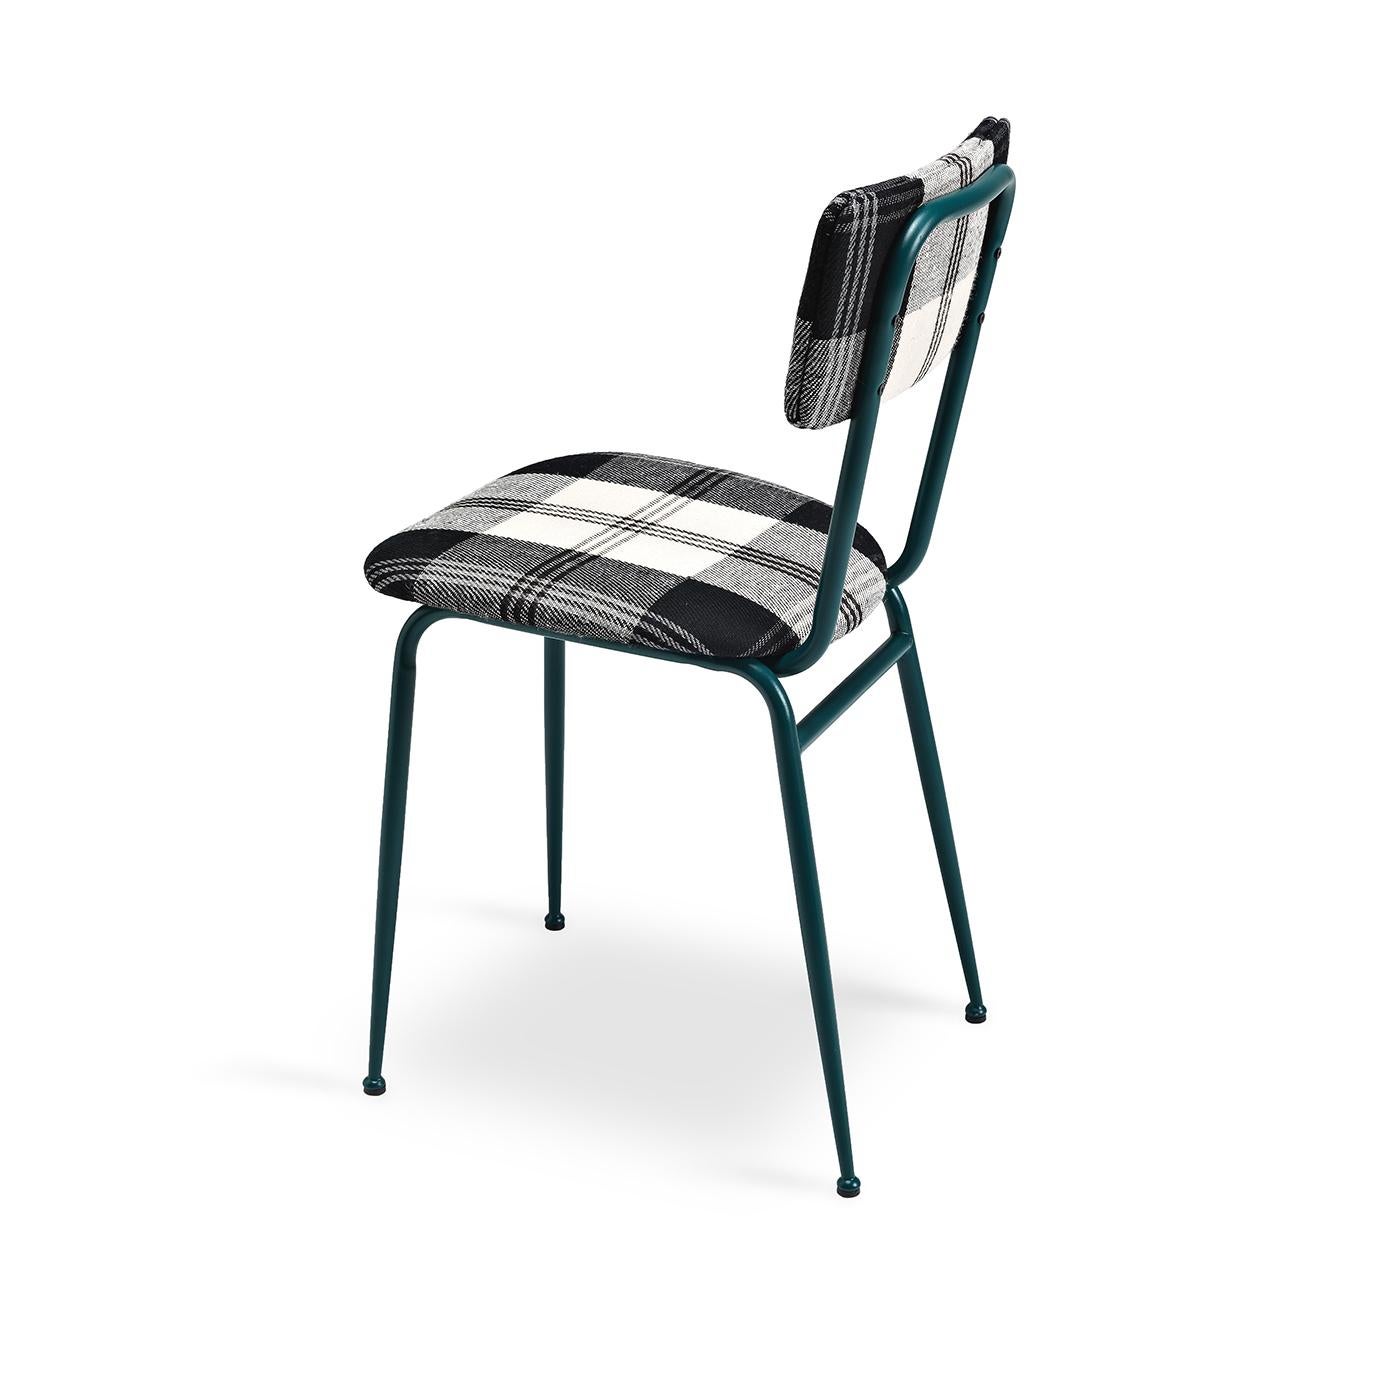 This hip, vintage dining chair has a sleek metal frame that is painted in a matte green finish. The seat and back are comfortable and structured thanks to polyurethane and curved wood inserts, are both are upholstered in a non-removable, large-print